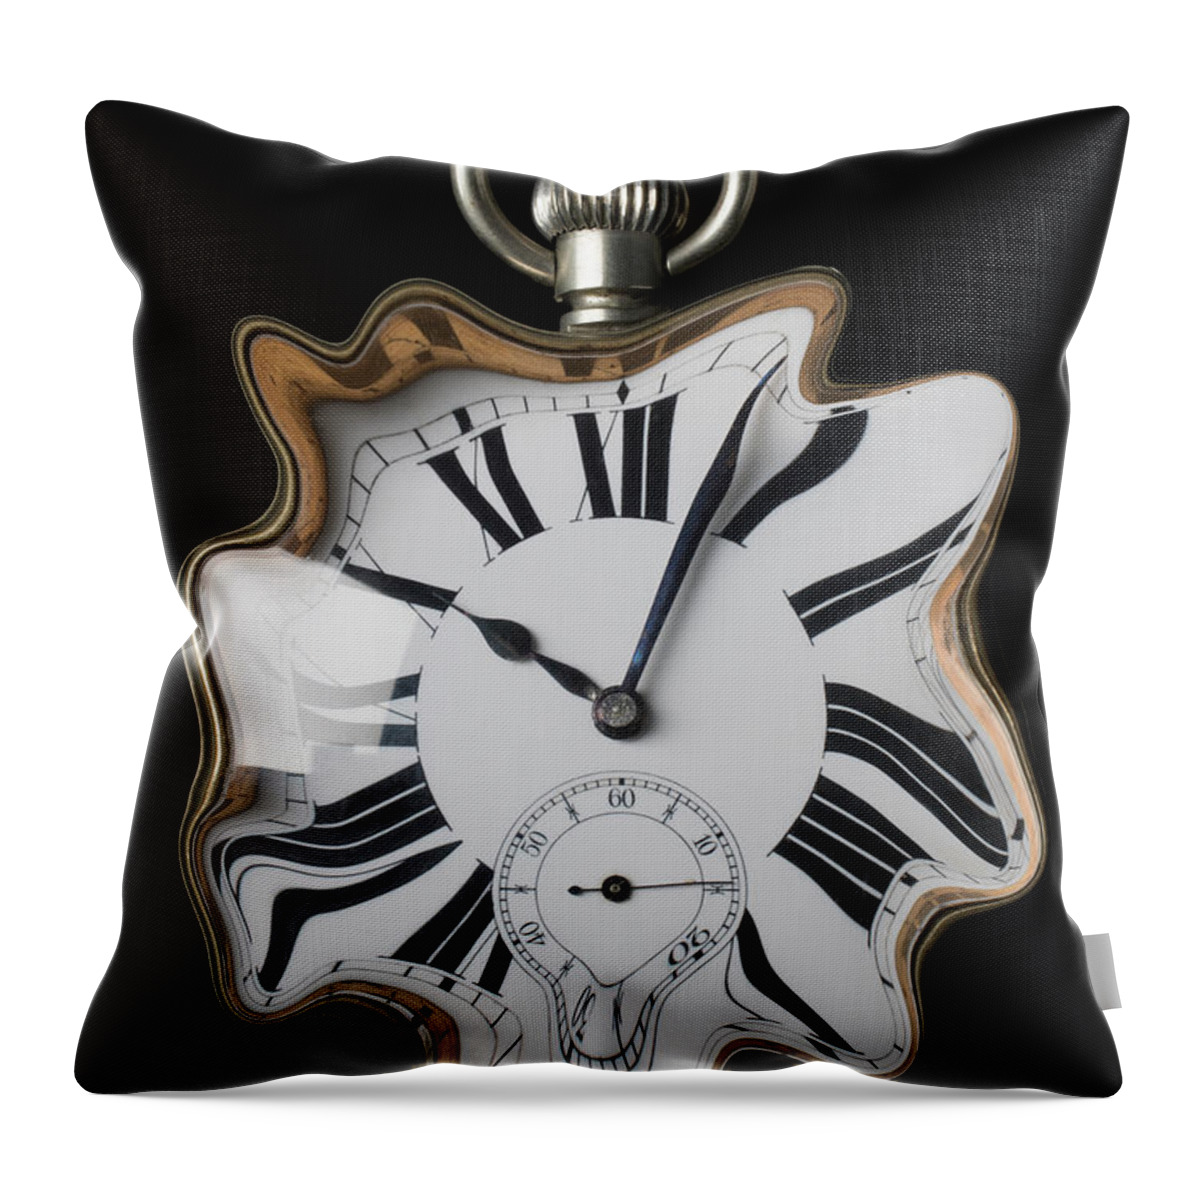 Time Throw Pillow featuring the photograph My Melting Clock by Garry Gay